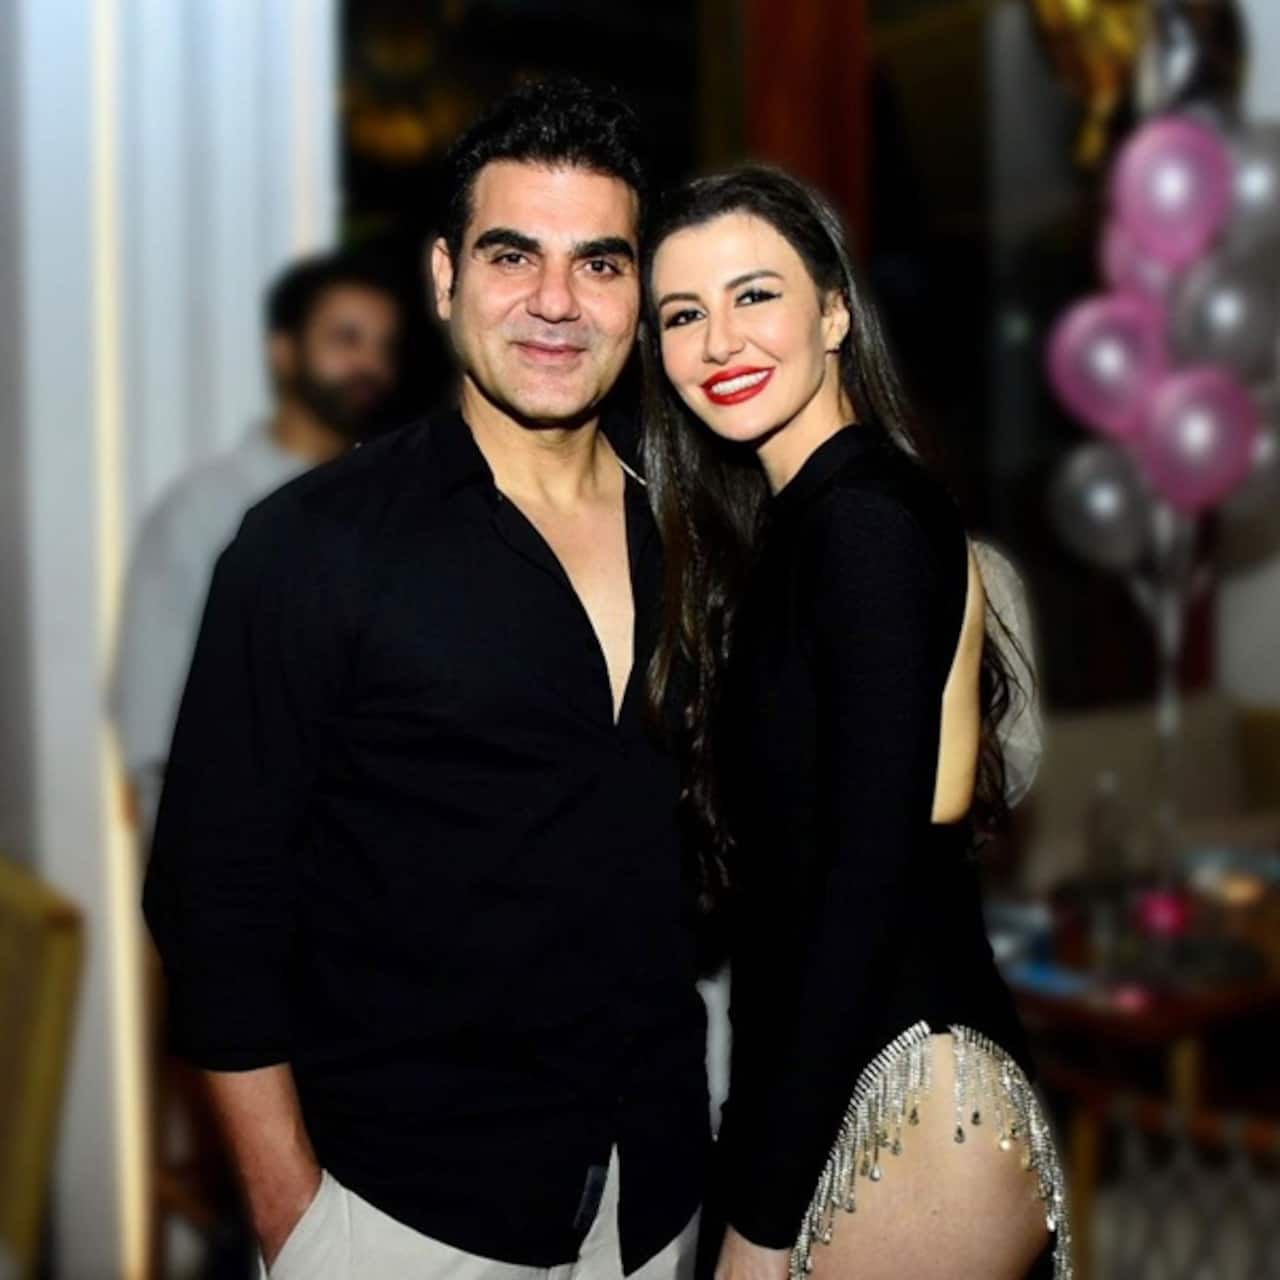 Giorgia Andriani believes her relationship with Arbaaz Khan has changed: 'We’re very good friends'